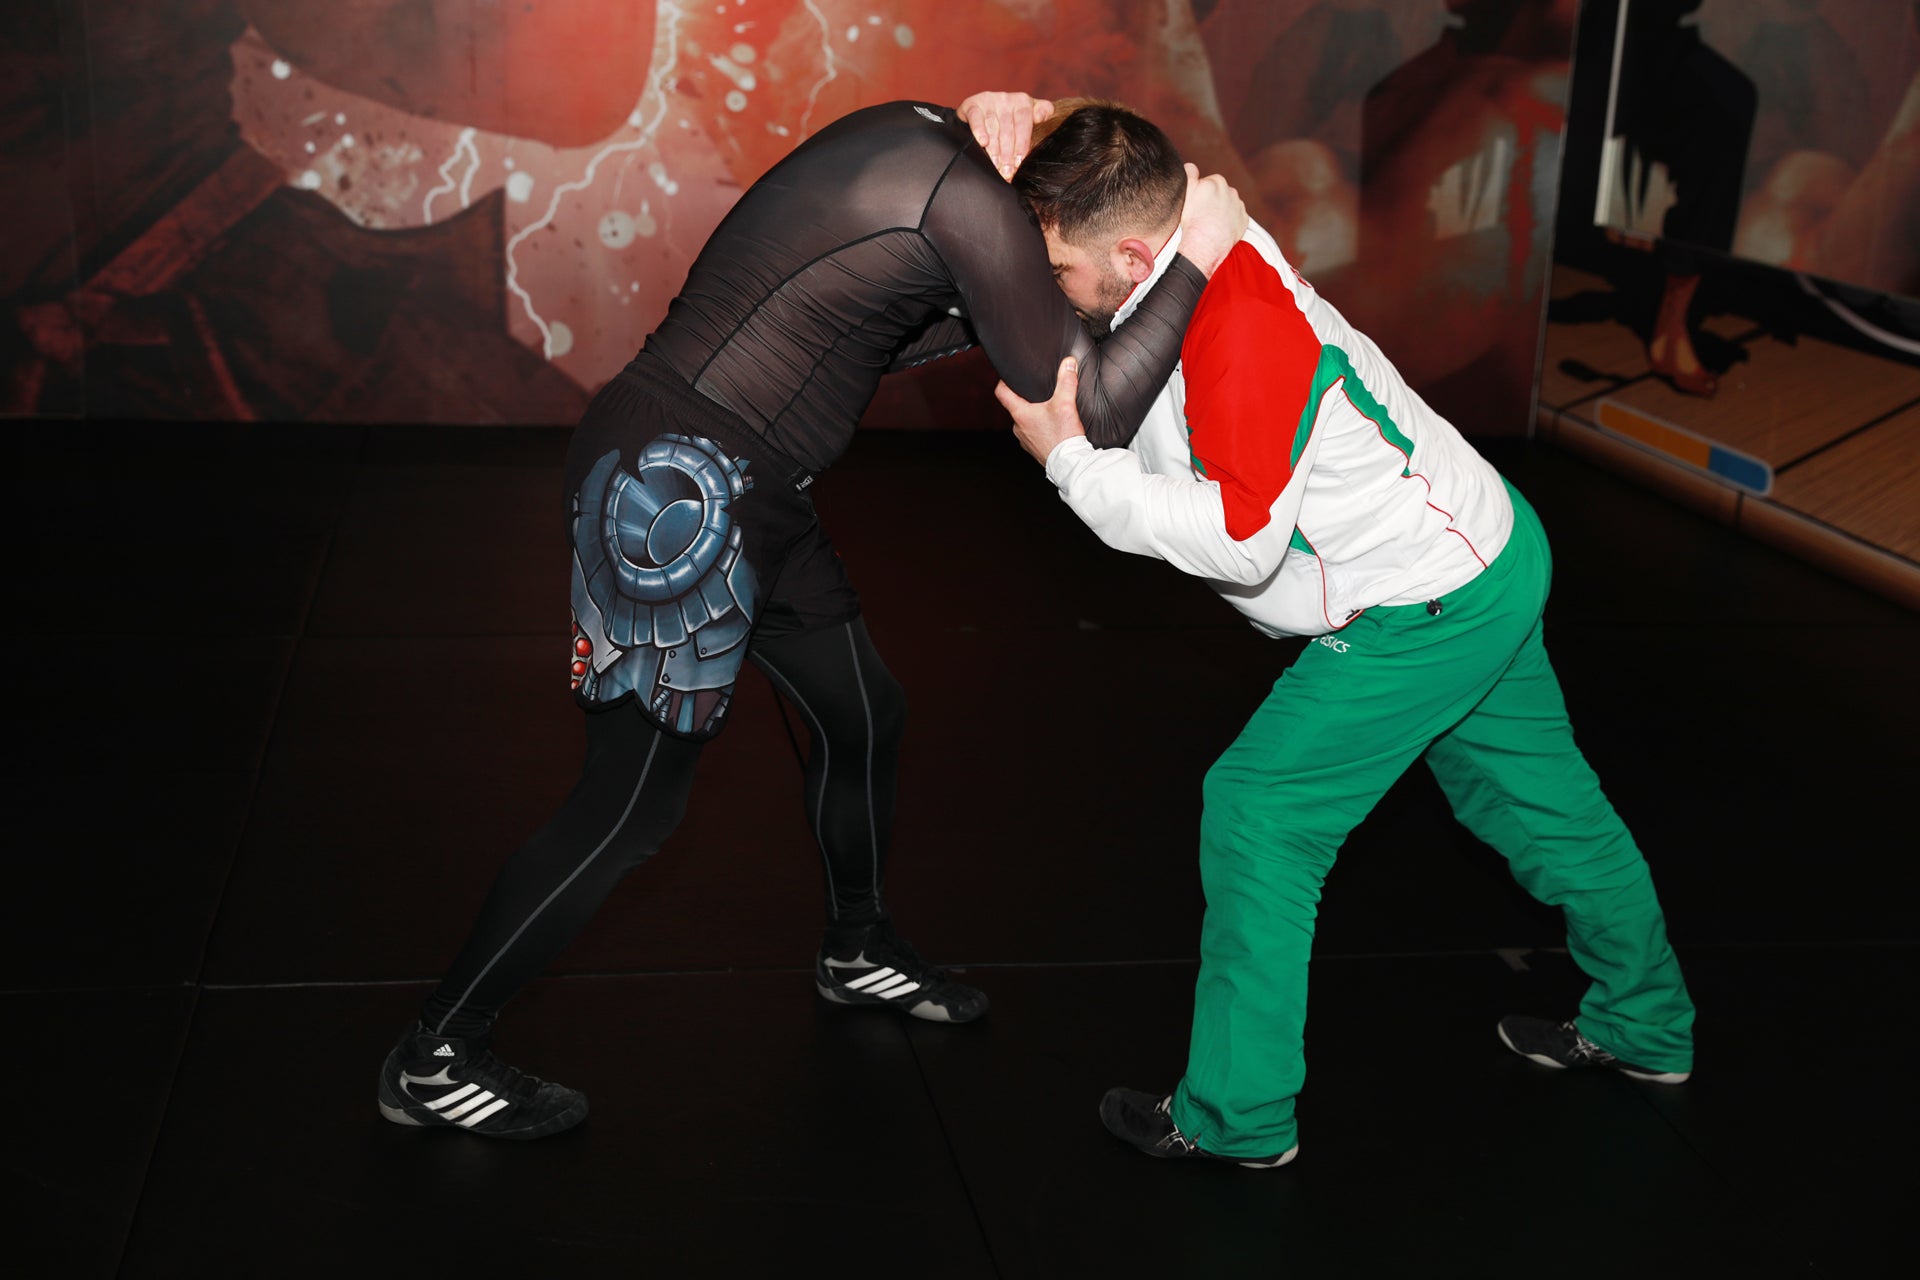 A photo of an athlete demonstrating setting up a takedown